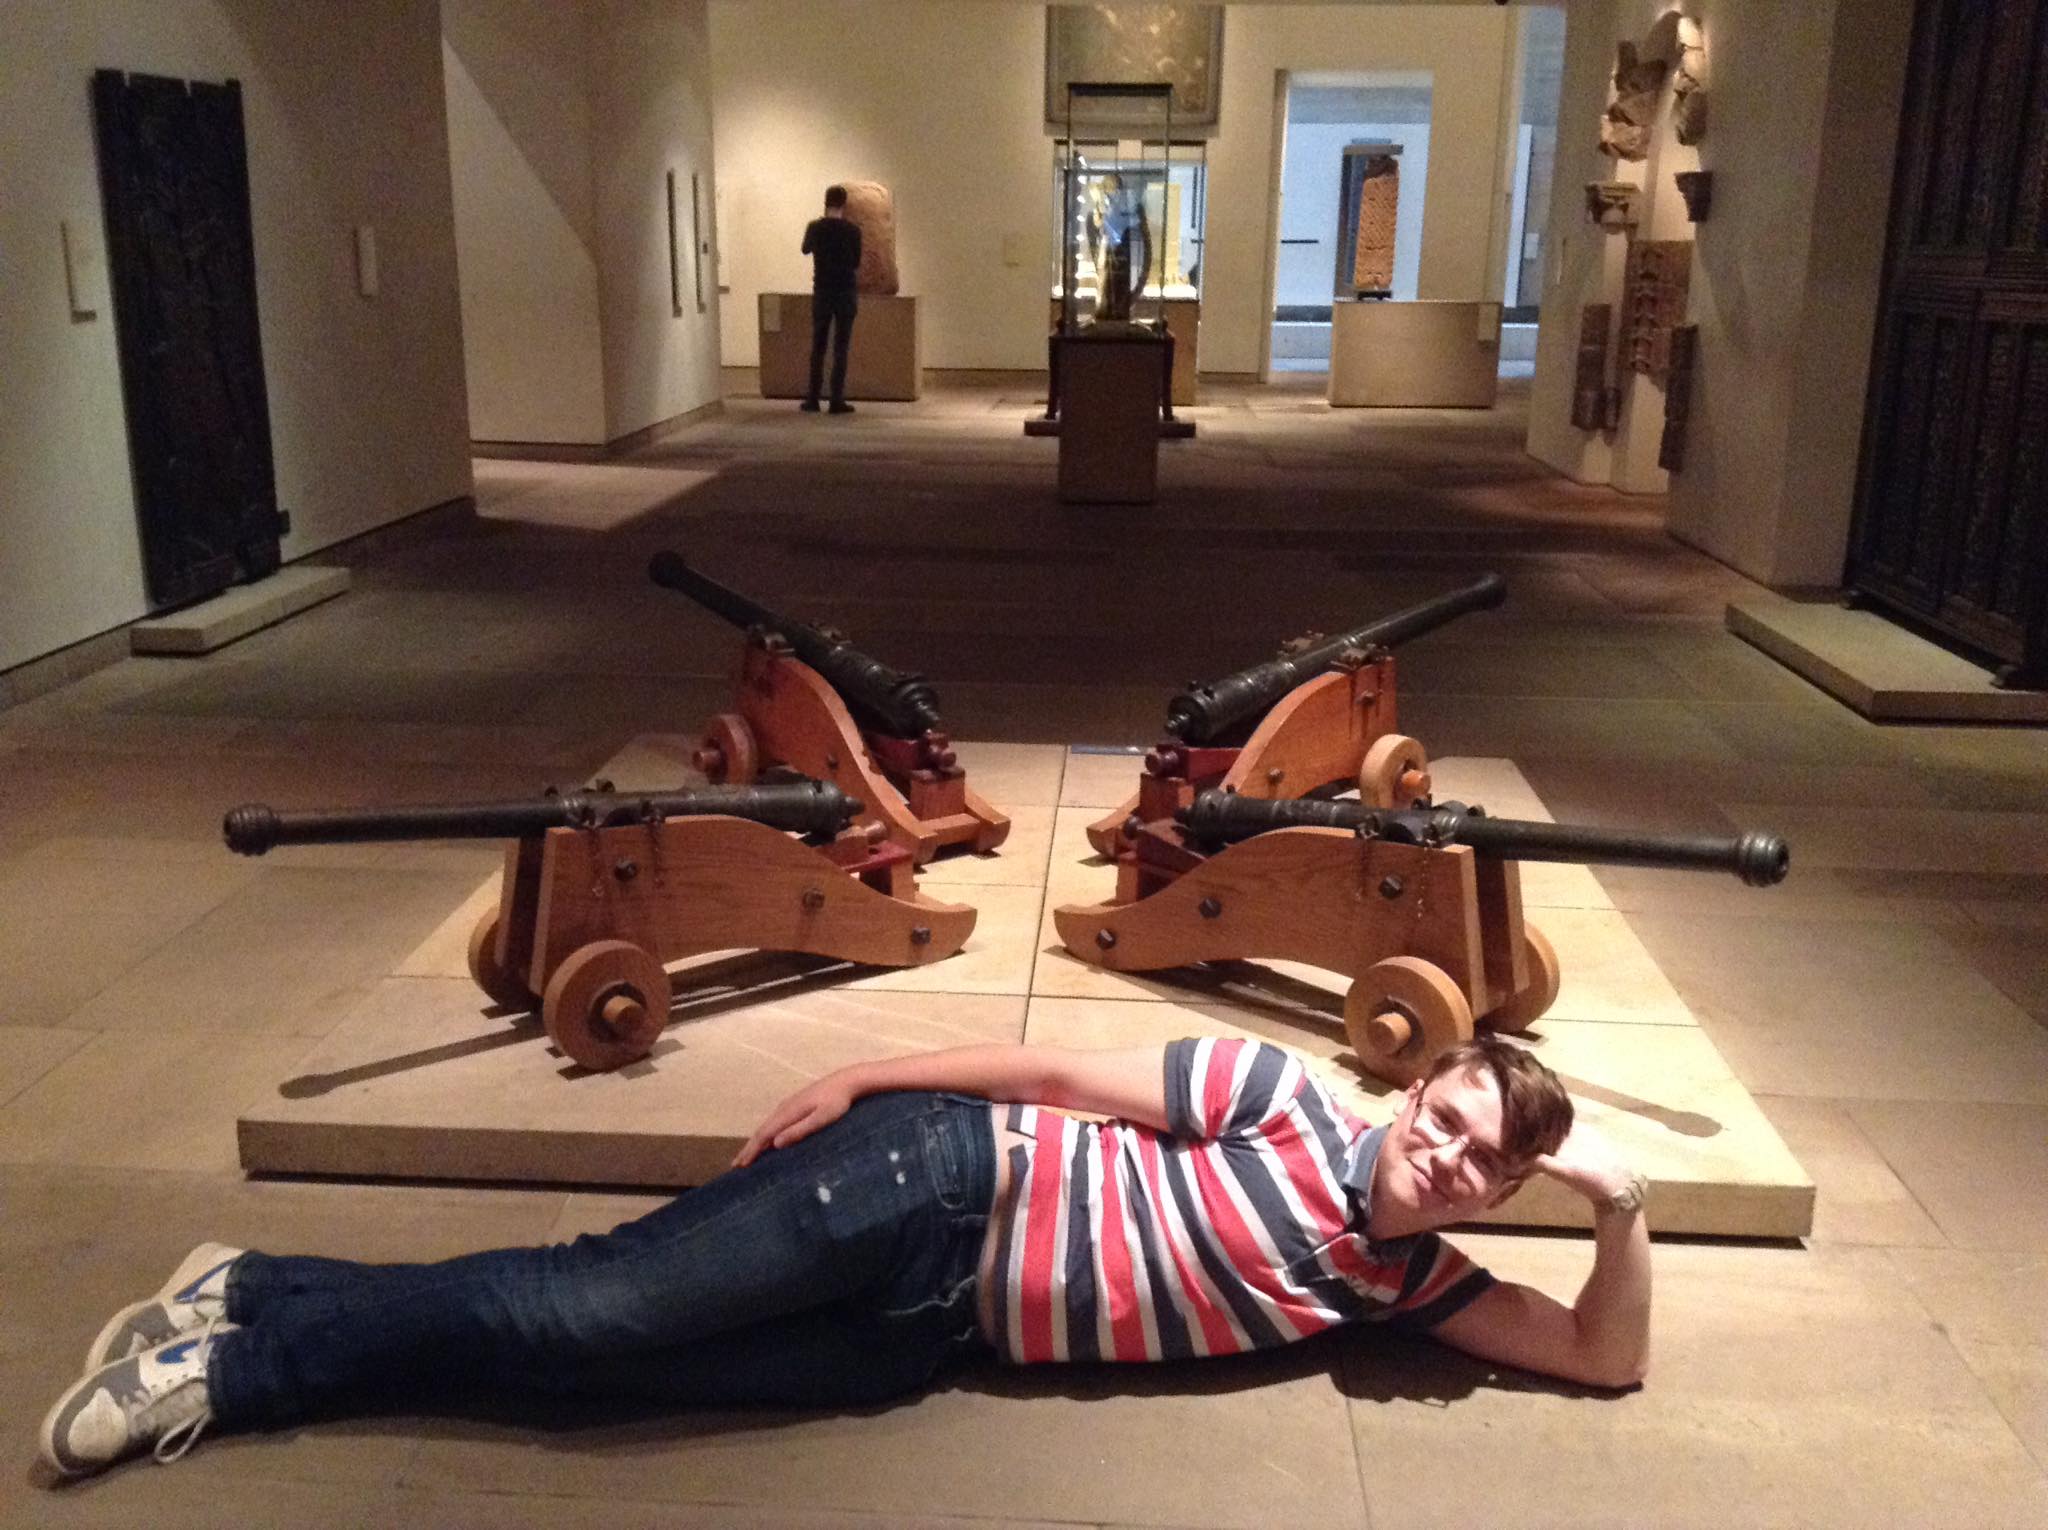 James, upon joining the museums Young Demonstrators, realised that it was one of the greatest decisions ever. Like a Roman conquering Greece or Nelson’s ships in water he has enjoyed every minute of it and will enjoy all the seconds to come.